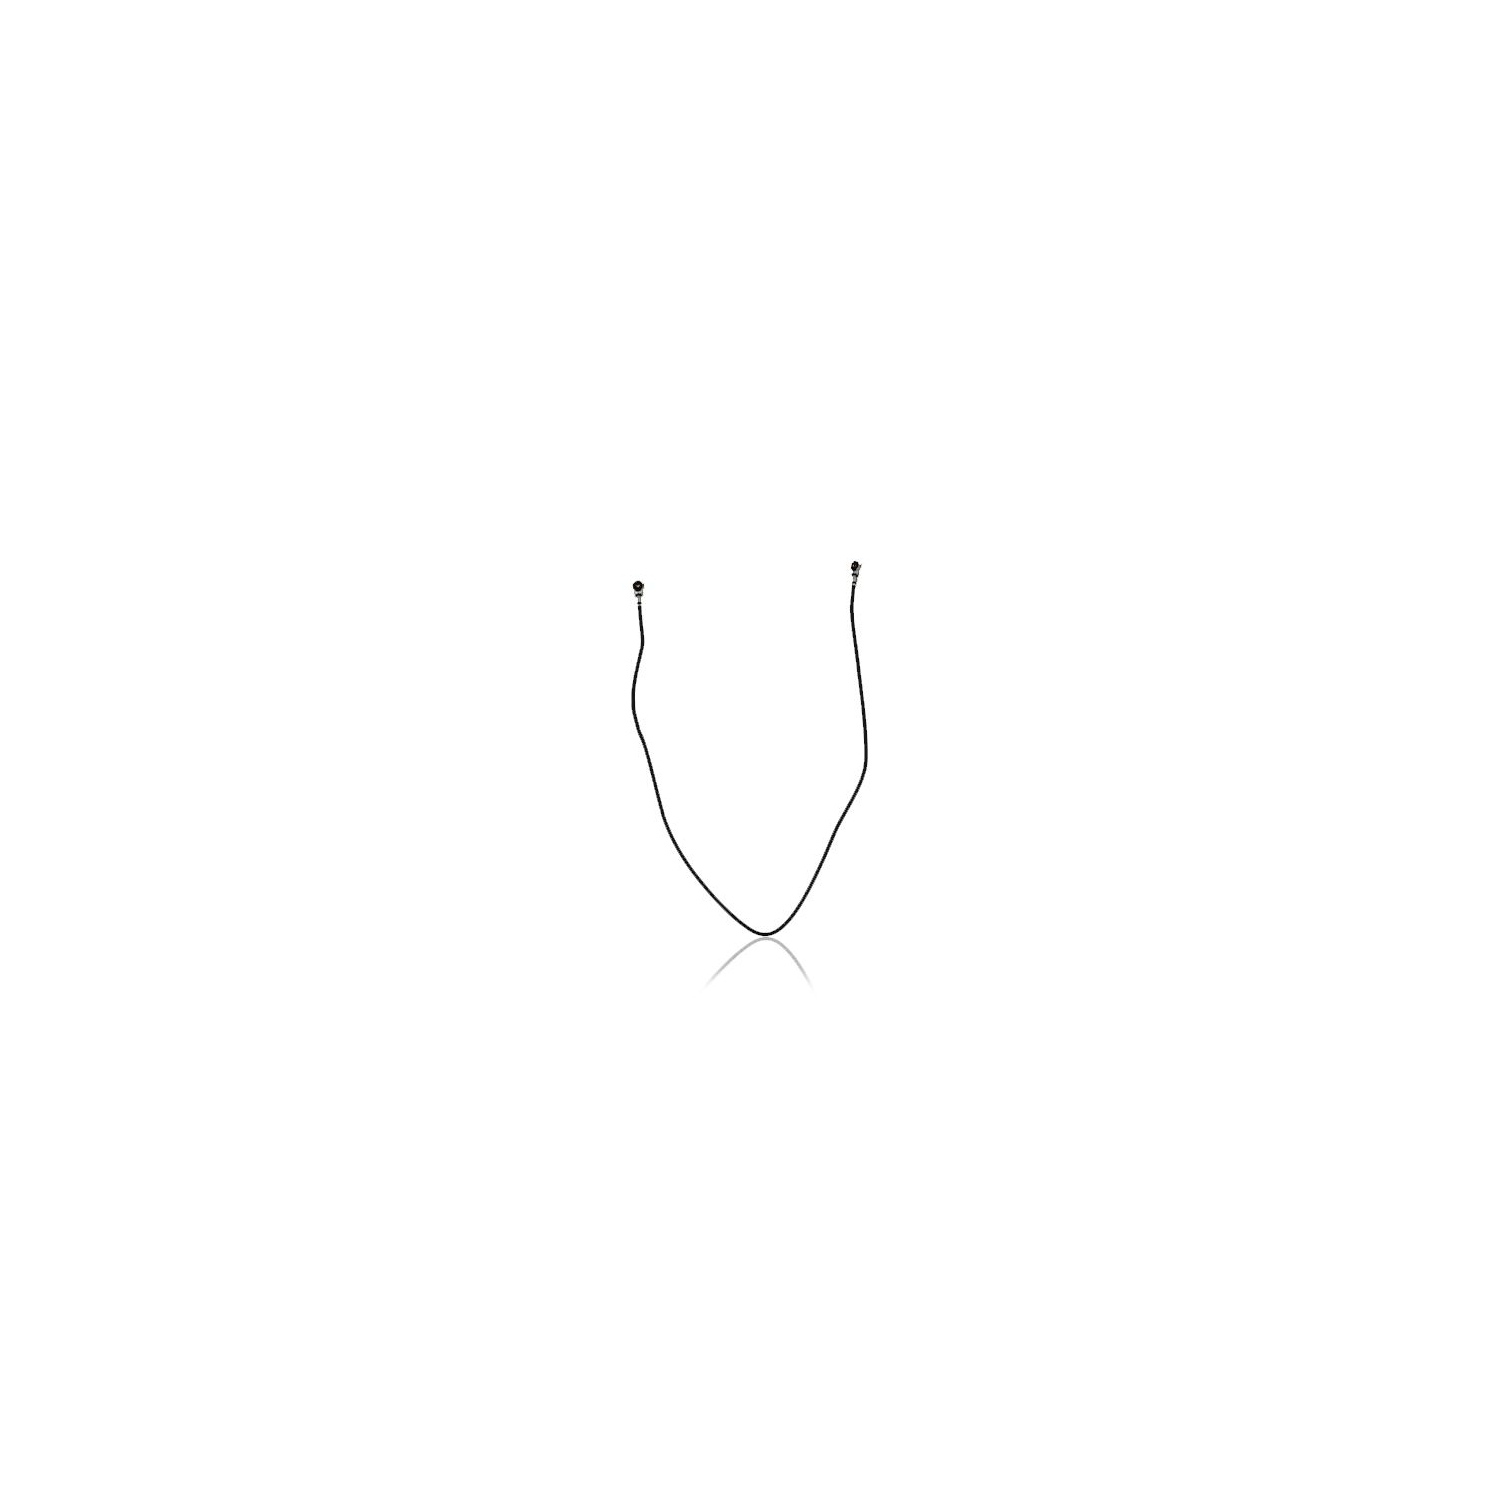 Replacement Antenna Connecting Cable Compatible For Huawei Mate 10 Lite